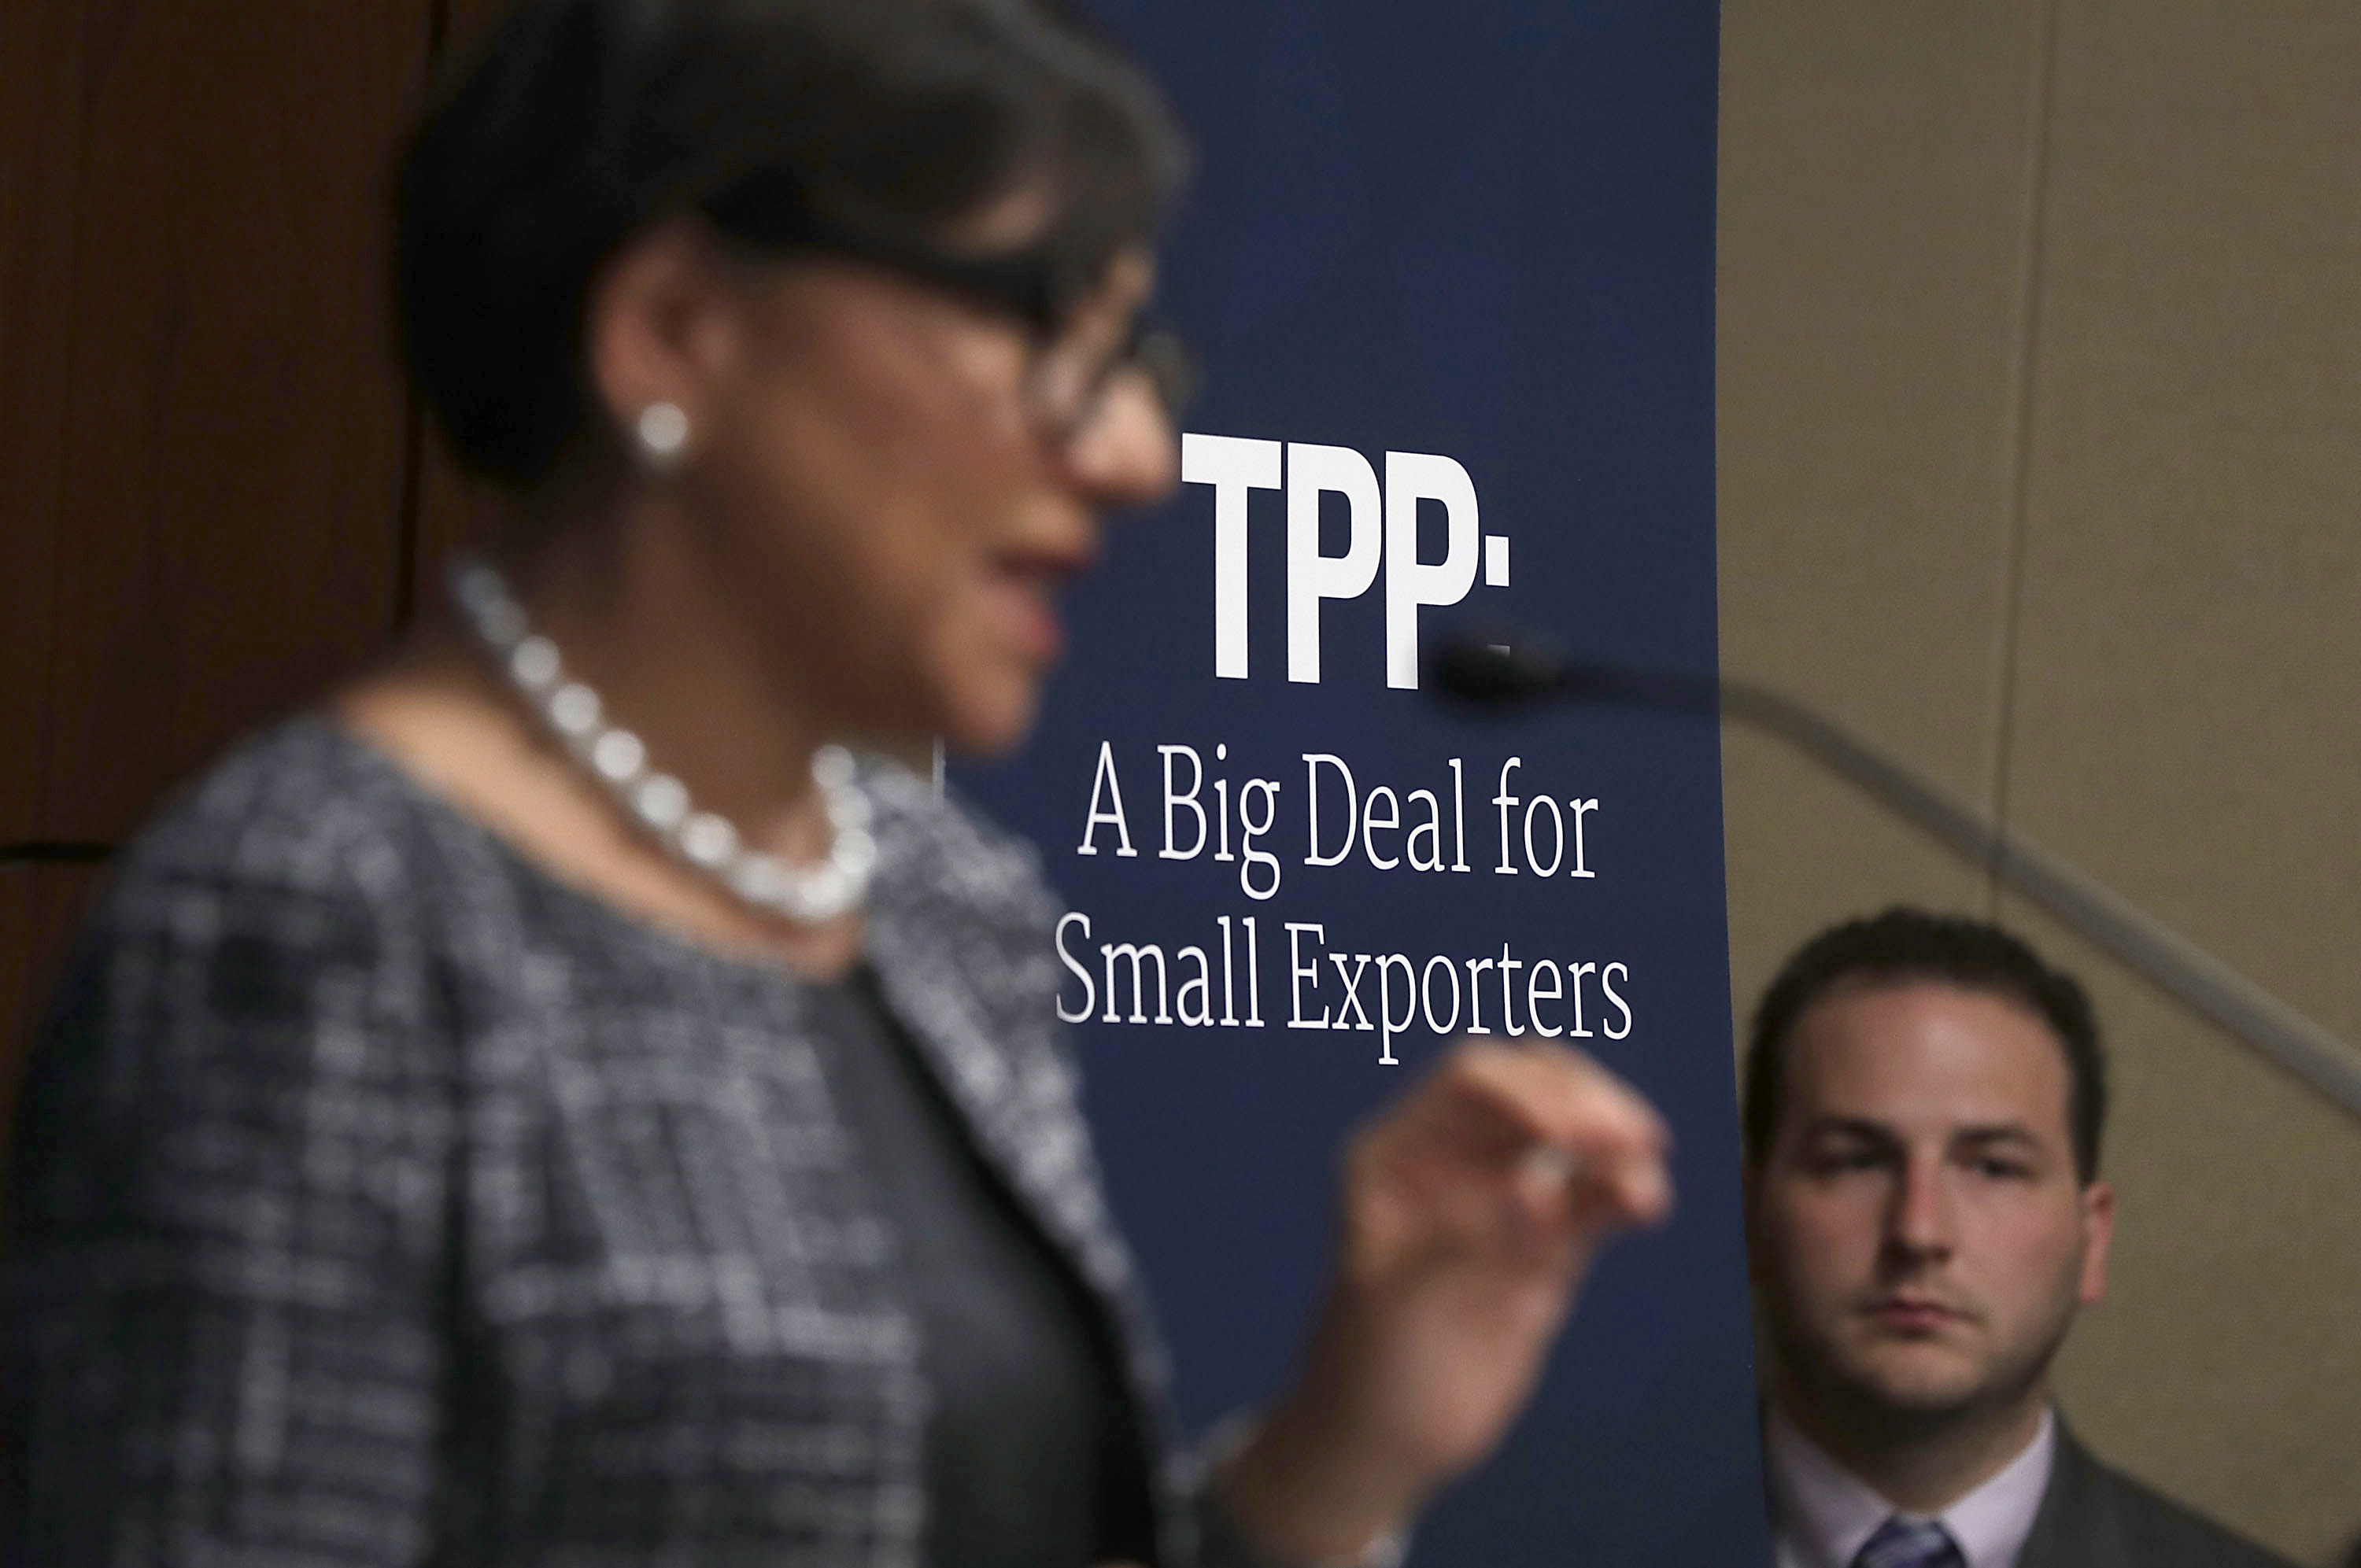 U.S. Secretary of Commerce Penny Pritzker speaks during a discussion on the Trans-Pacific Partnership (TPP) September 26, 2016 on Capitol Hill in Washington, DC.